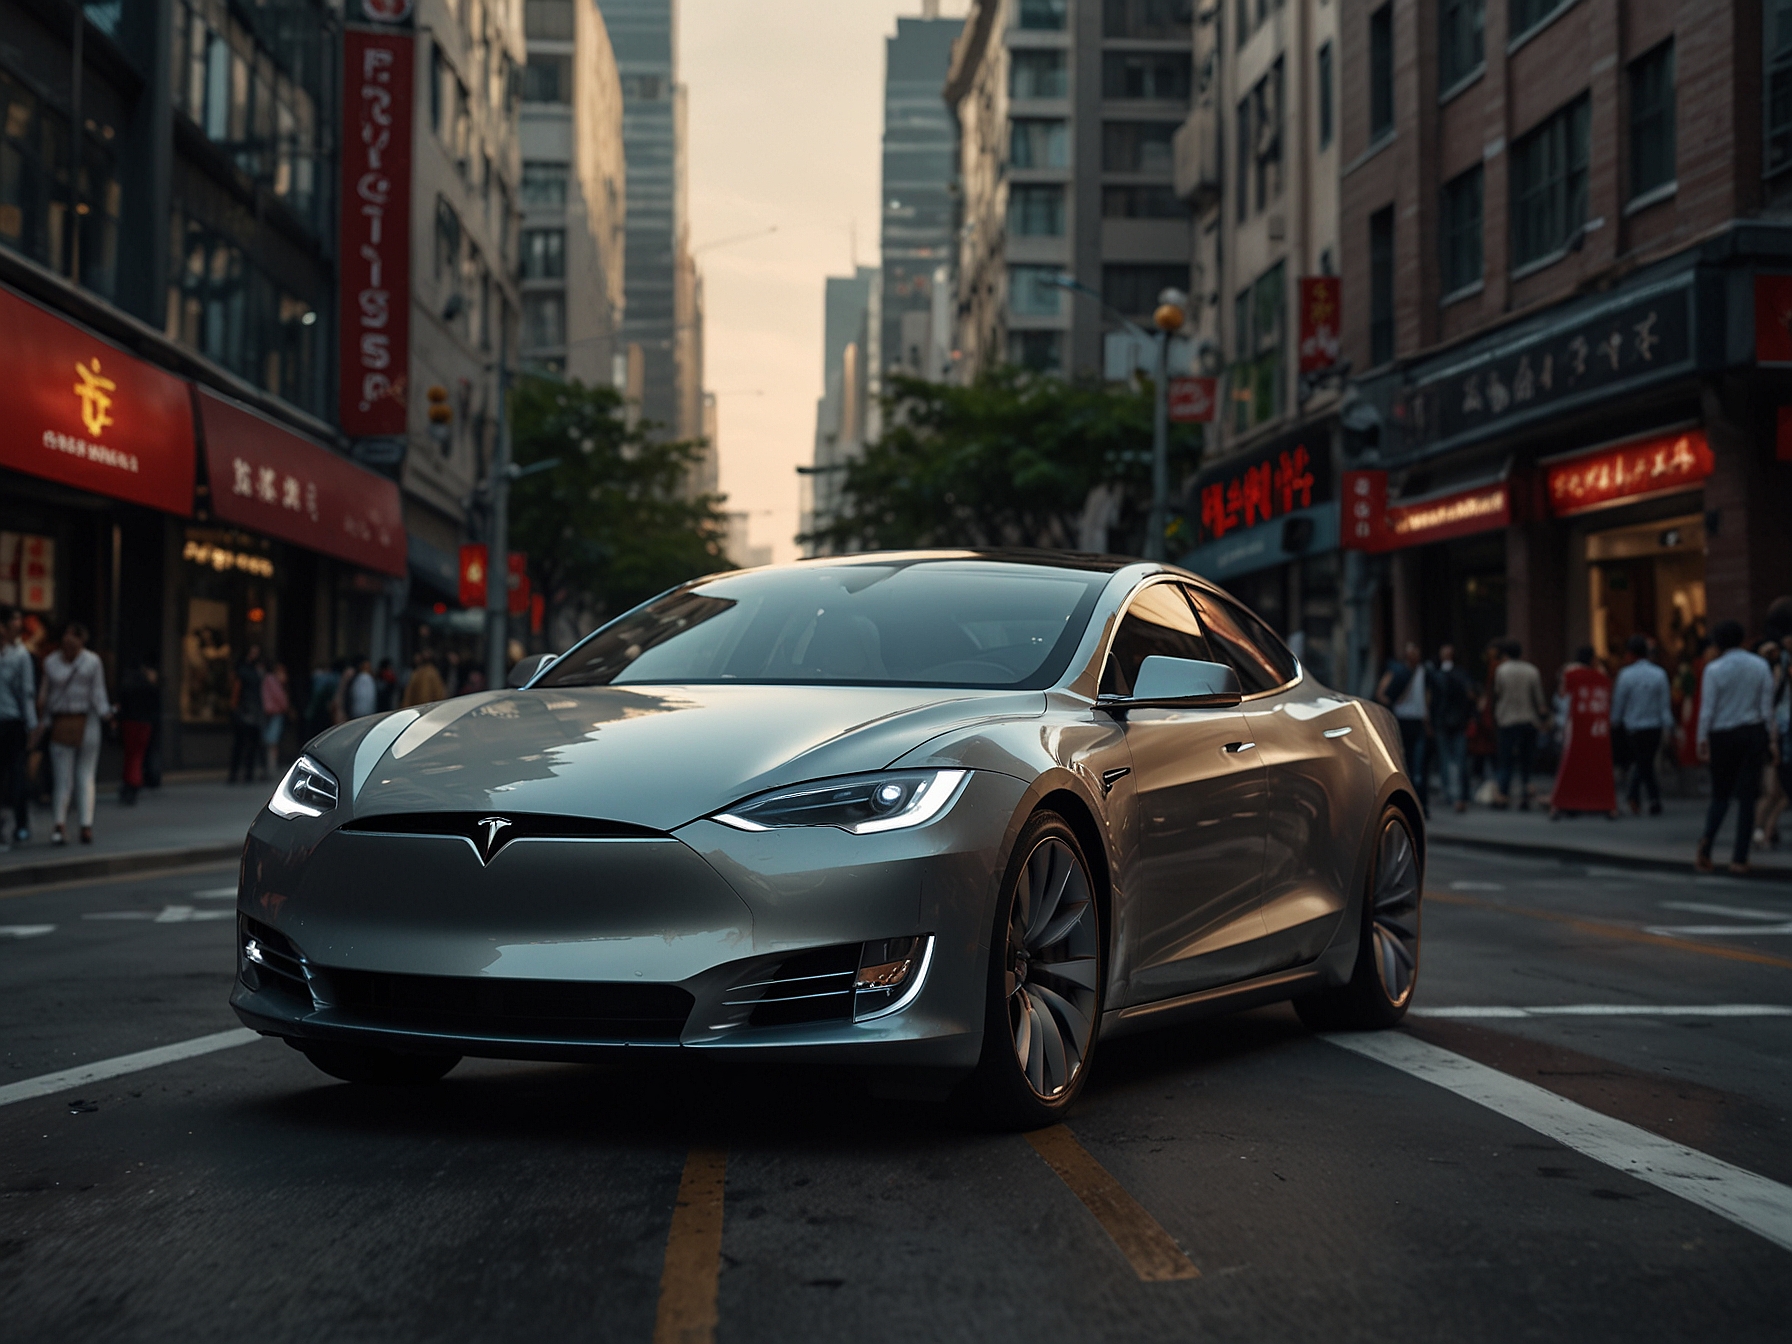 A Tesla car equipped with Full Self-Driving technology navigates the bustling streets of a Chinese city, showcasing the integration of advanced autonomous features in real-world conditions.